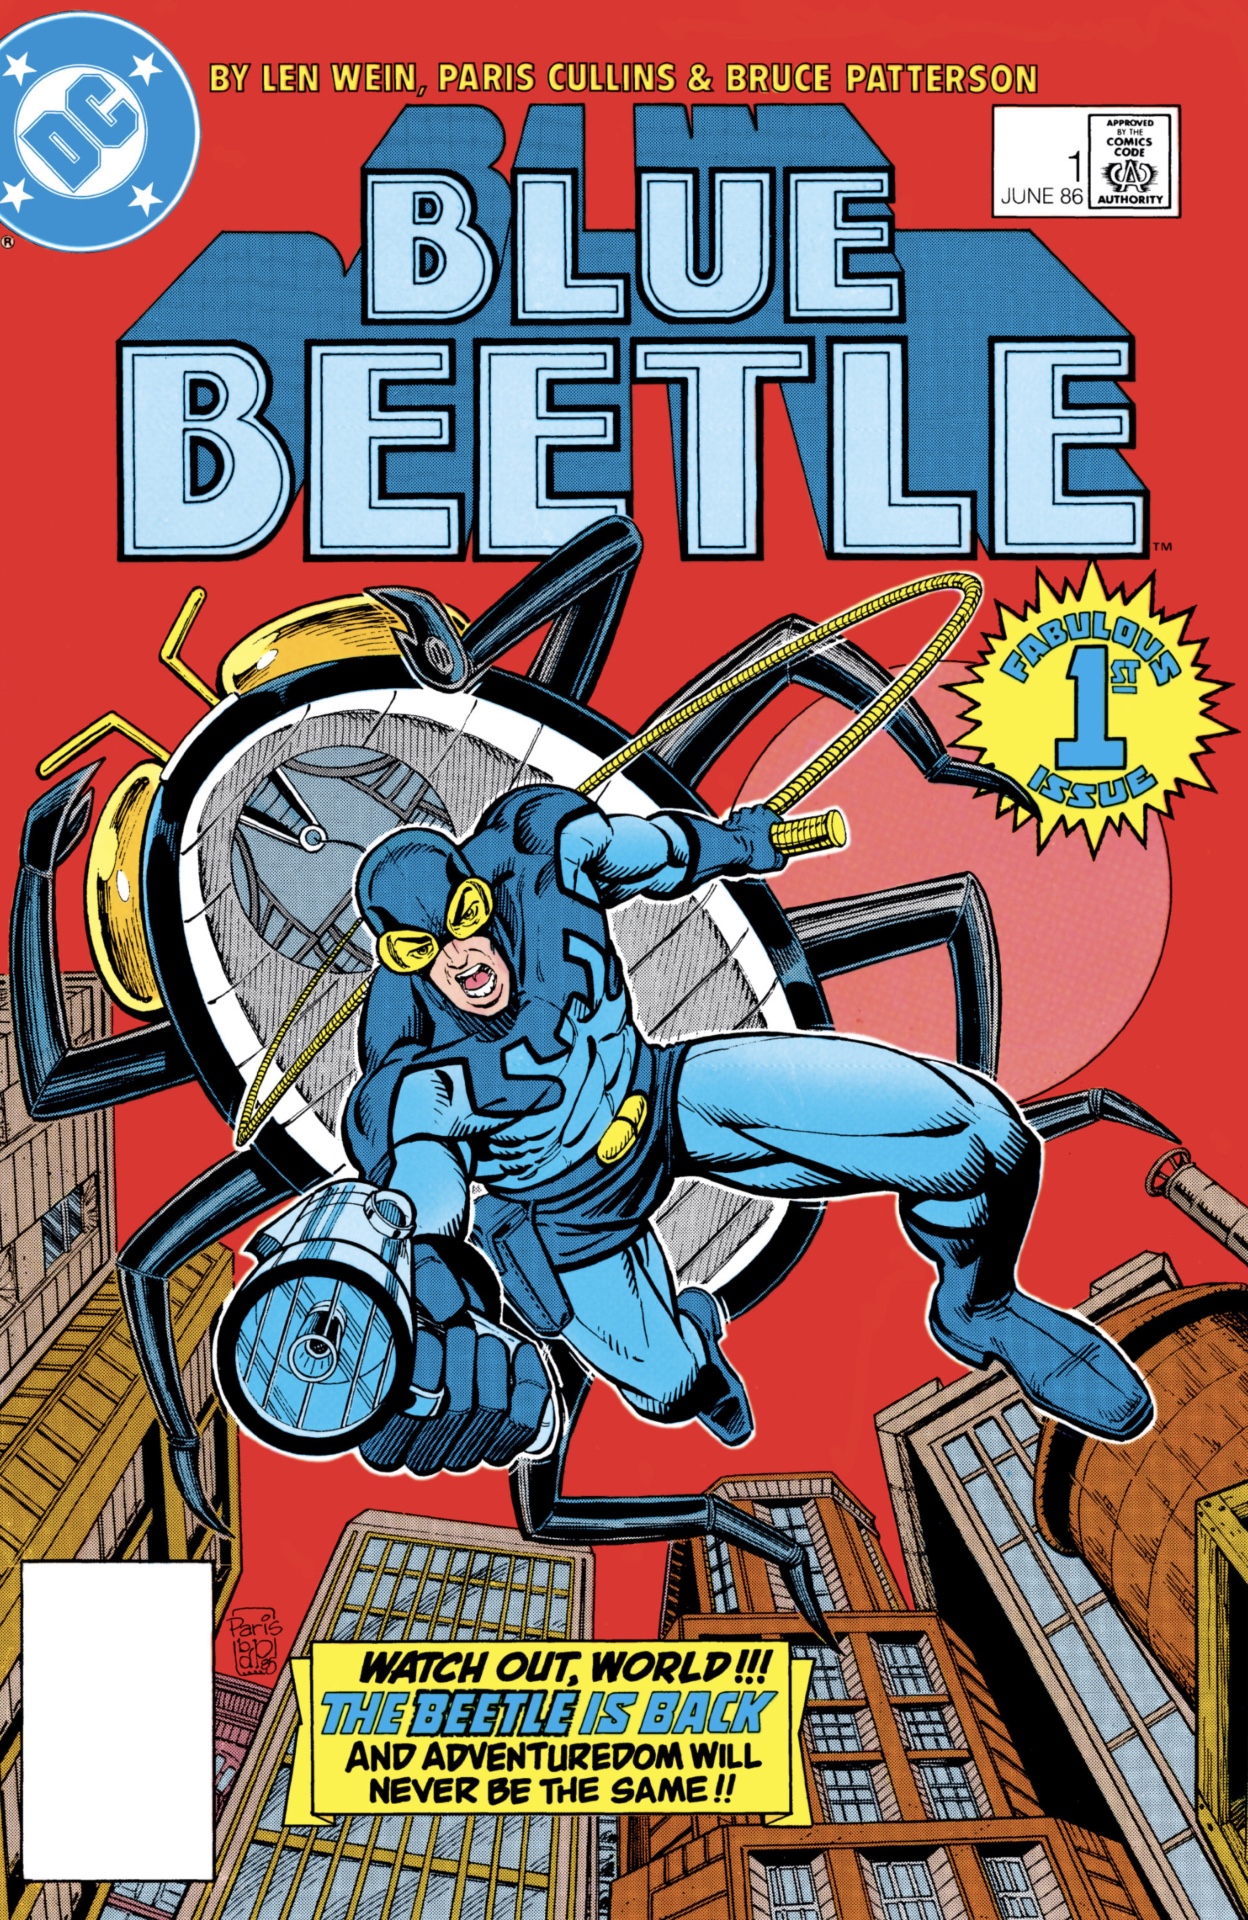 REVIEW: Blue Beetle blasts his way into superhero history